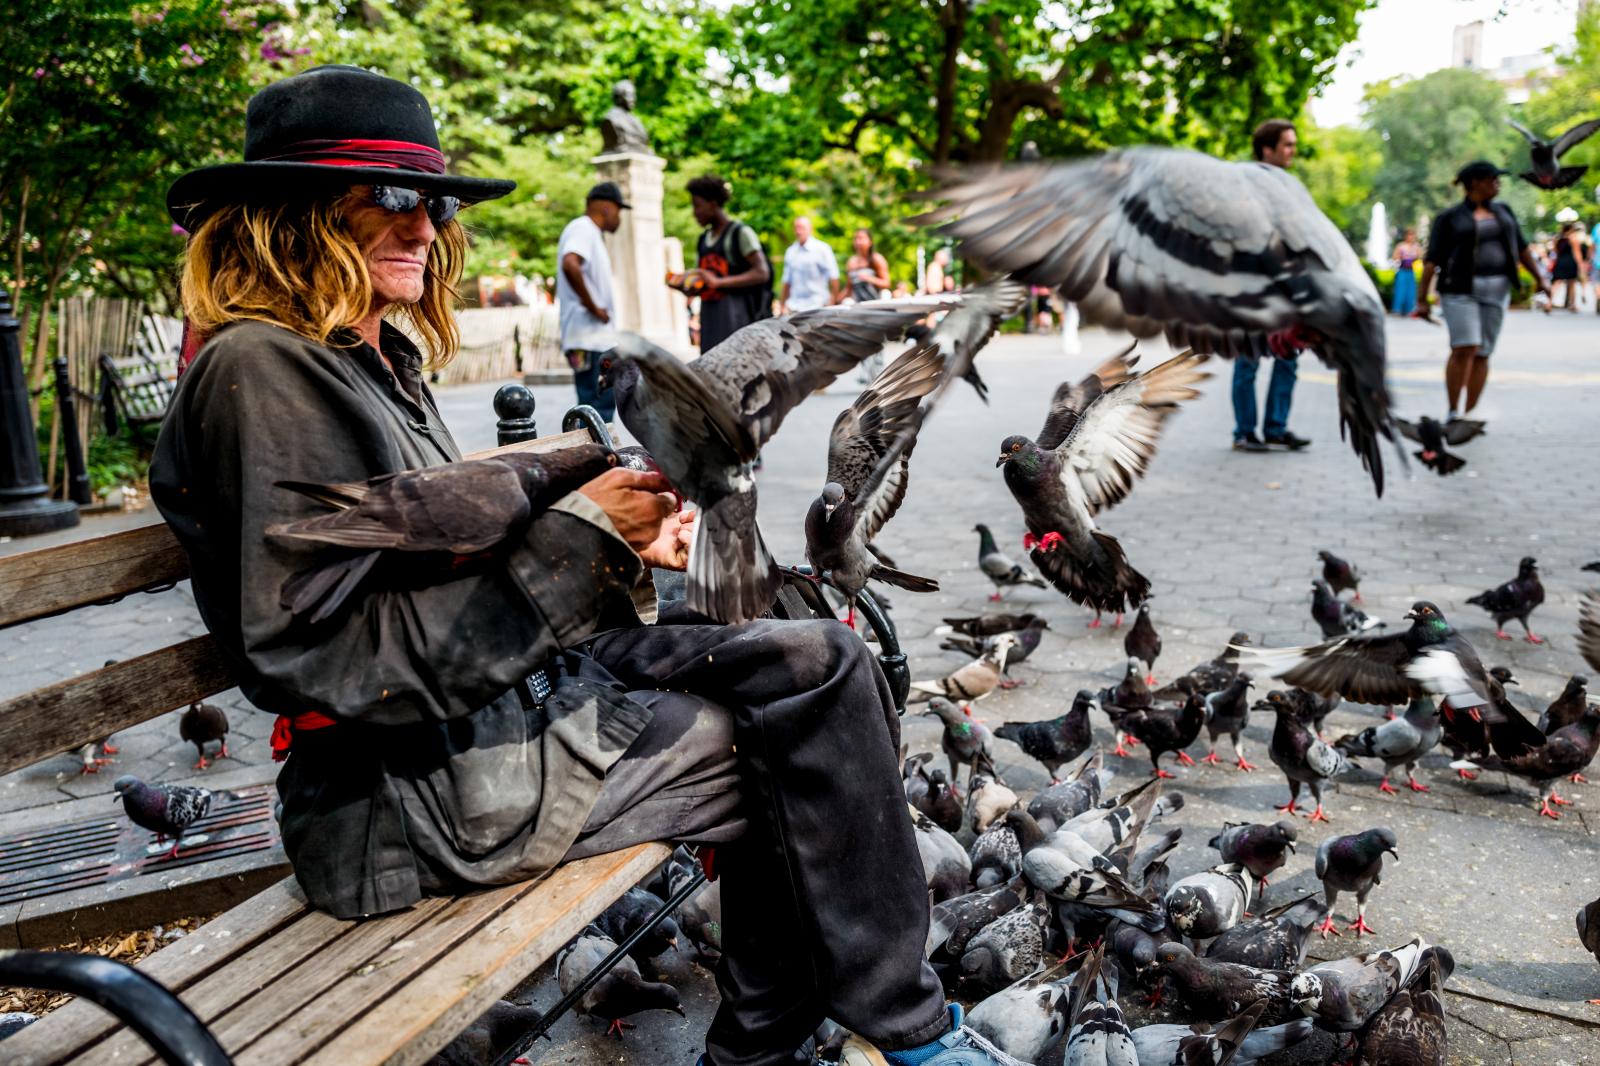 Image from Street Photography/Color Works -  Washington Square Park, Manhattan NYC  August, 2015 